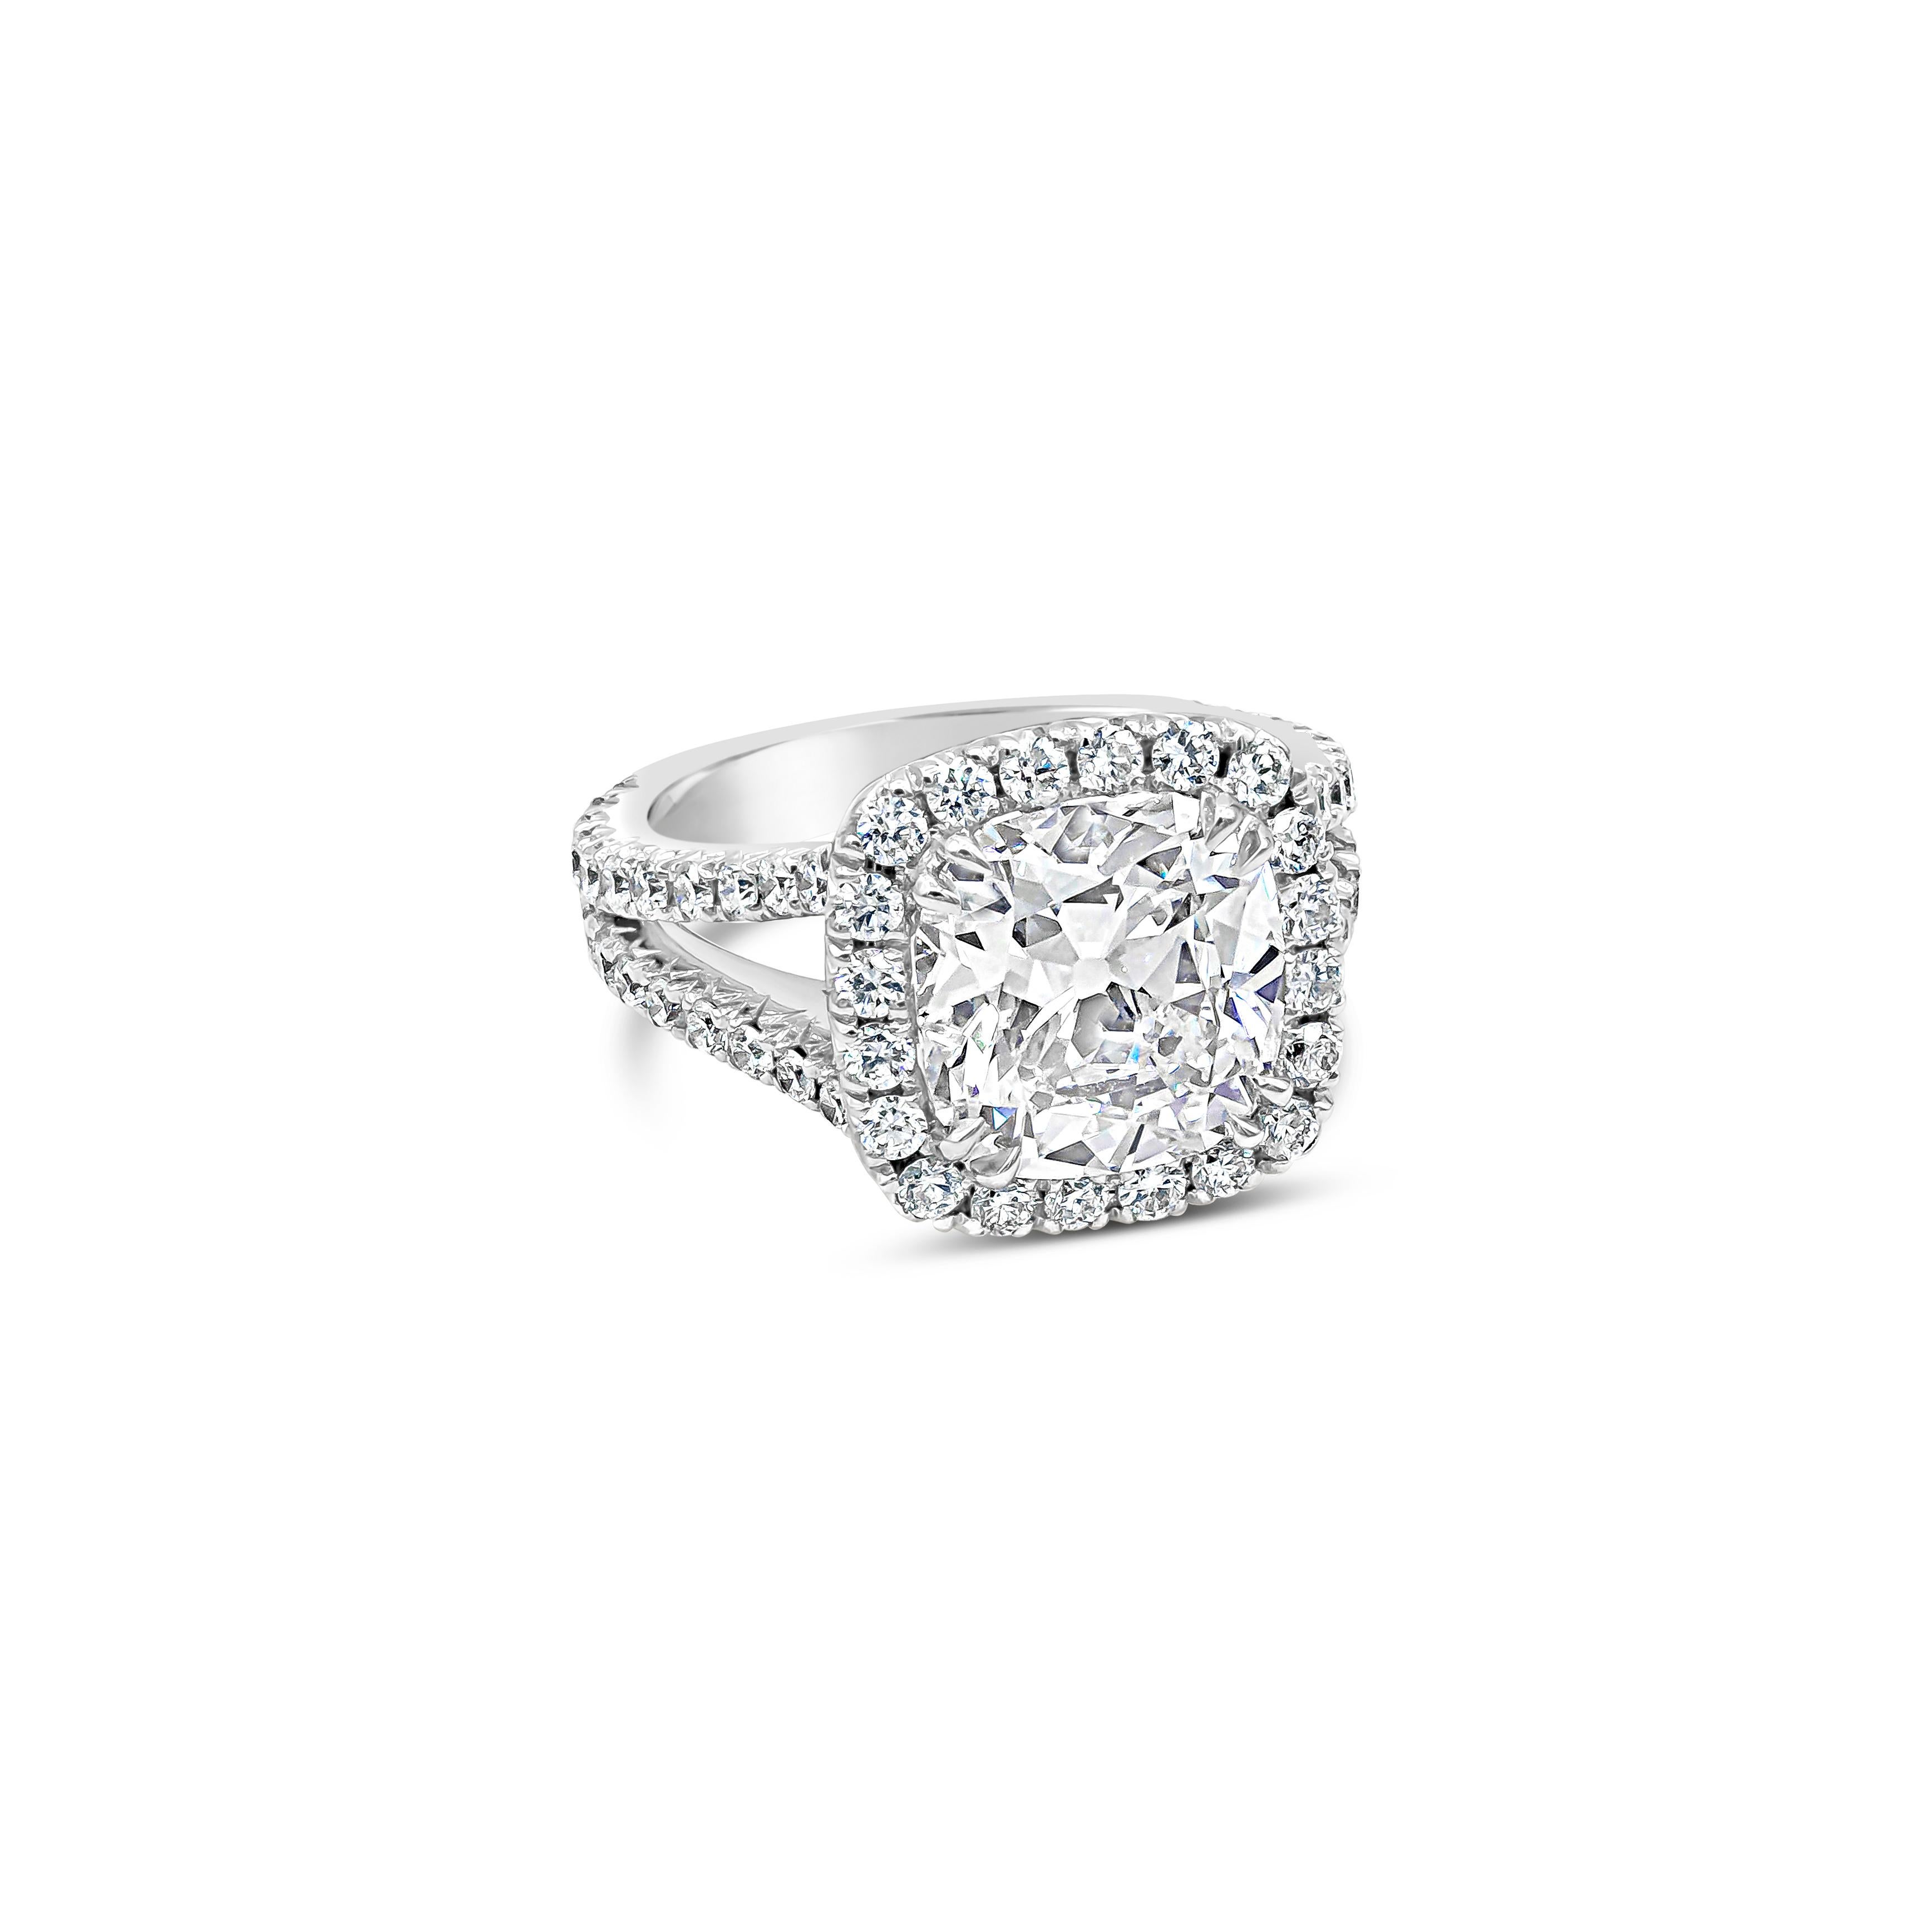 An elegant and vibrant halo engagement ring, featuring an impressive cushion cut diamond of 4.11 carats. This center stone is certified by GIA as G color and SI1 clarity. It is surrounded by a single row of round brilliant cut diamonds of 1.40